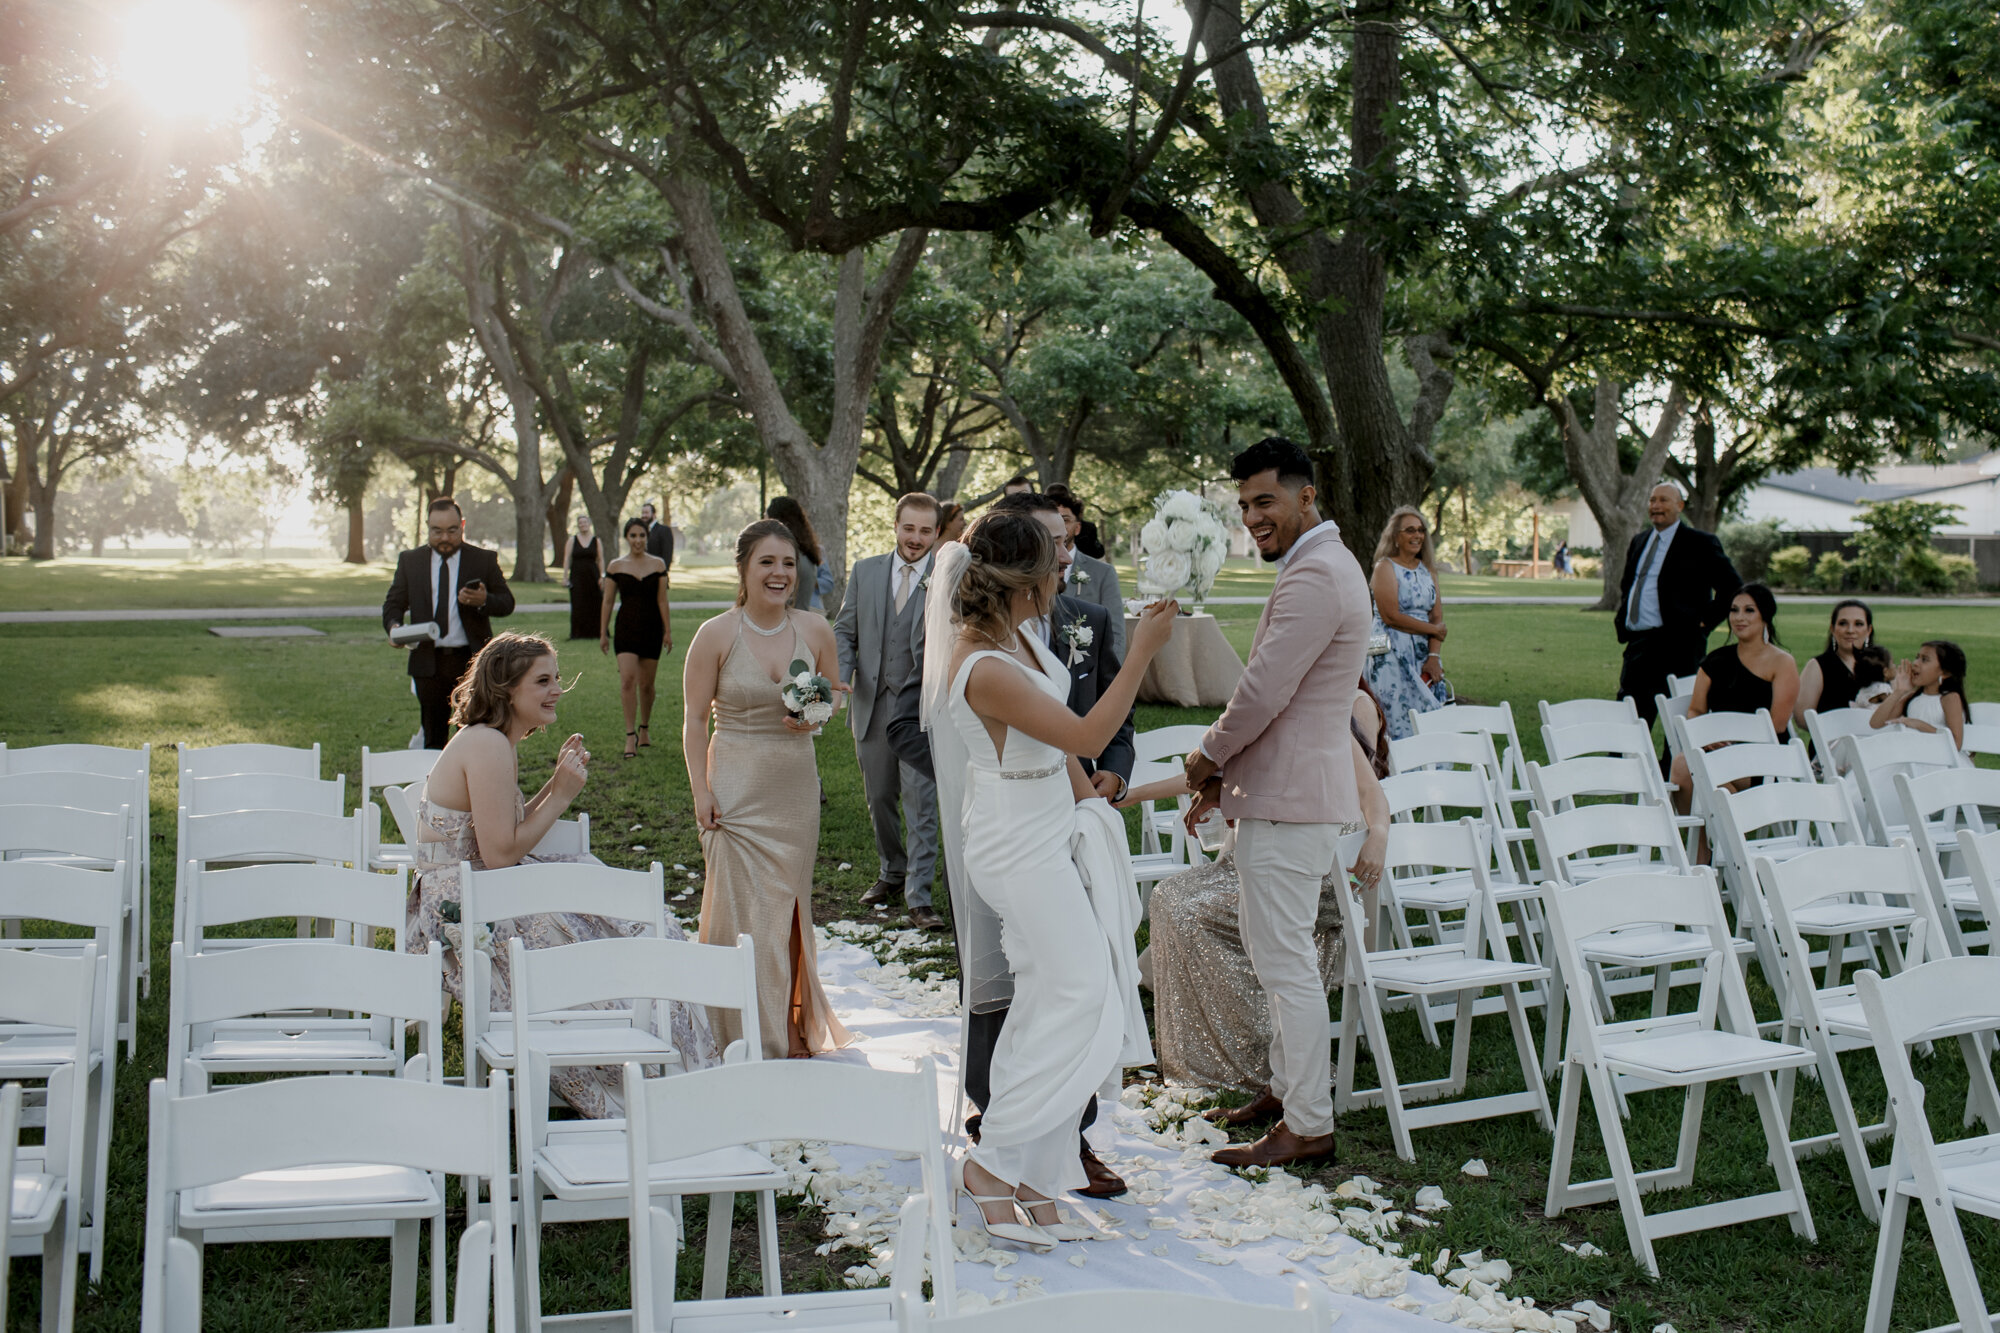 Bride and groom backstage pics. Glowing Wedding in Golden Champagne Tones at The Orchard at Caney Creek in Wharton, TX